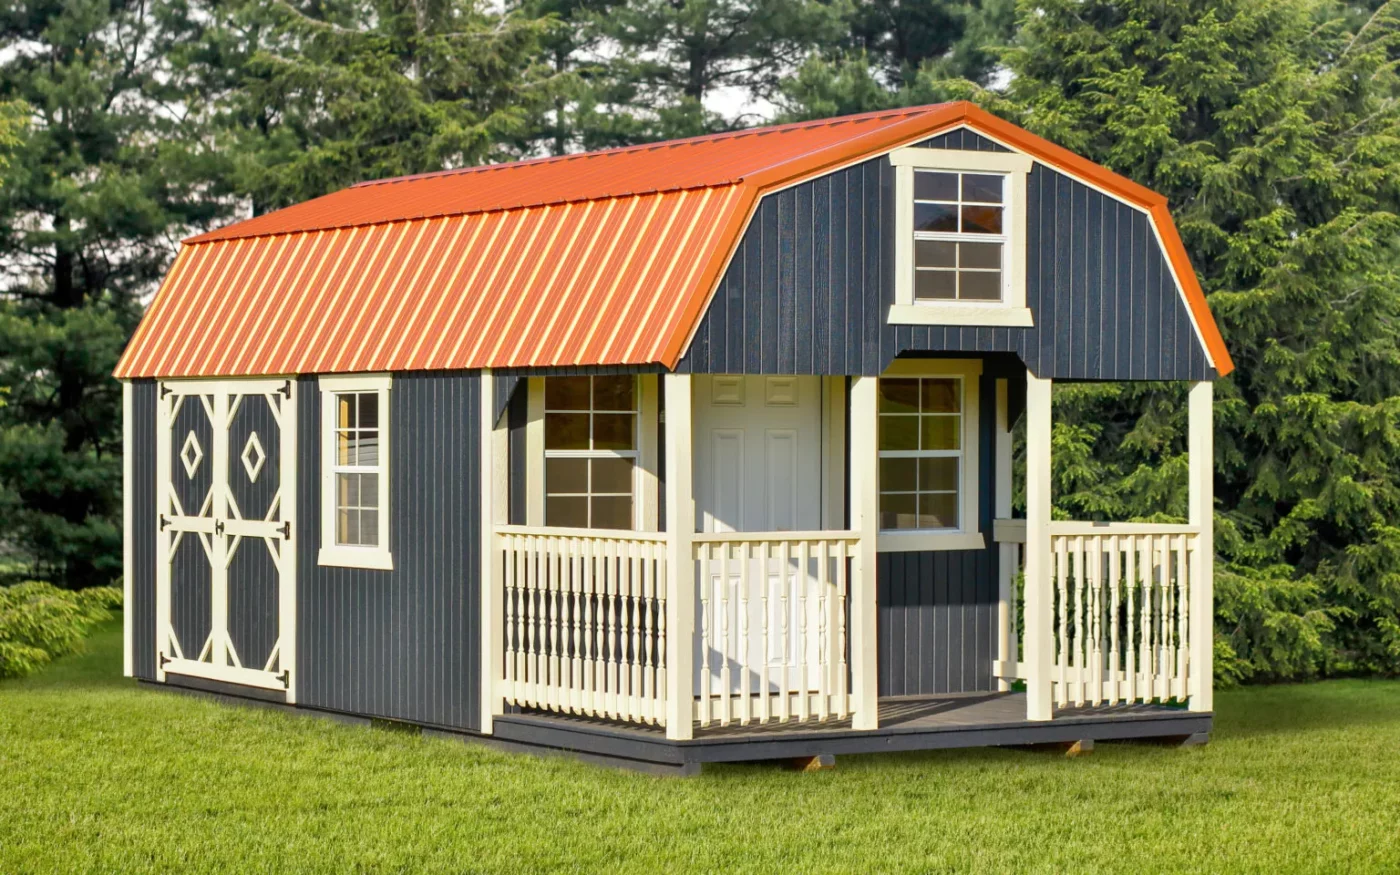 Lofted Cabins For Sale In Sears, Michigan